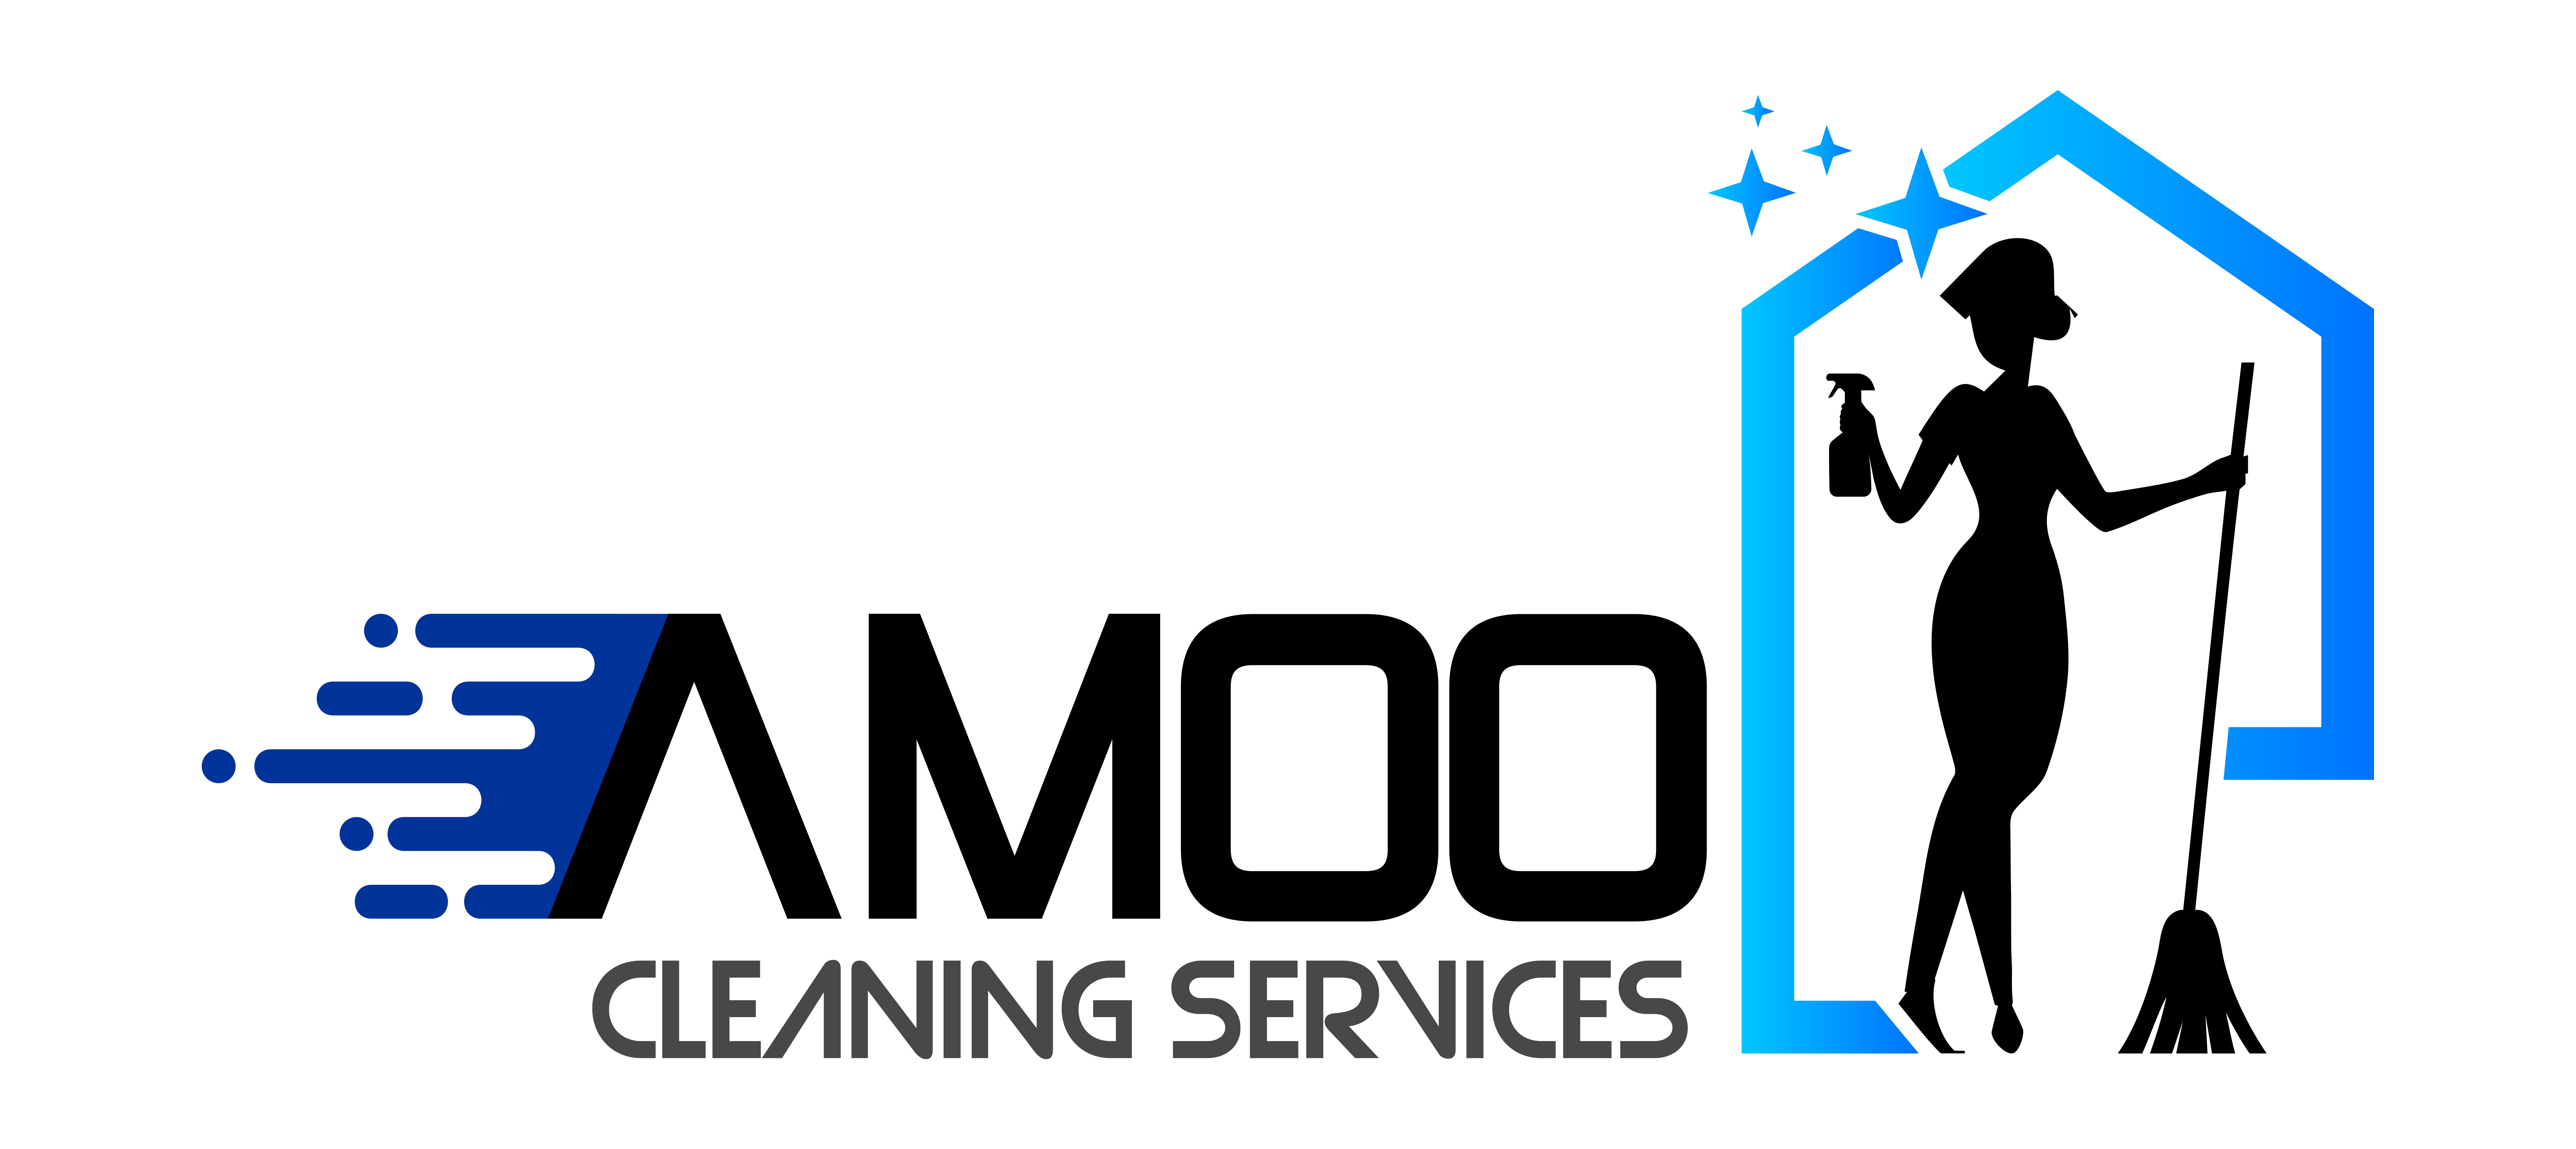 AMOO CLEANING SERVICES LTD.